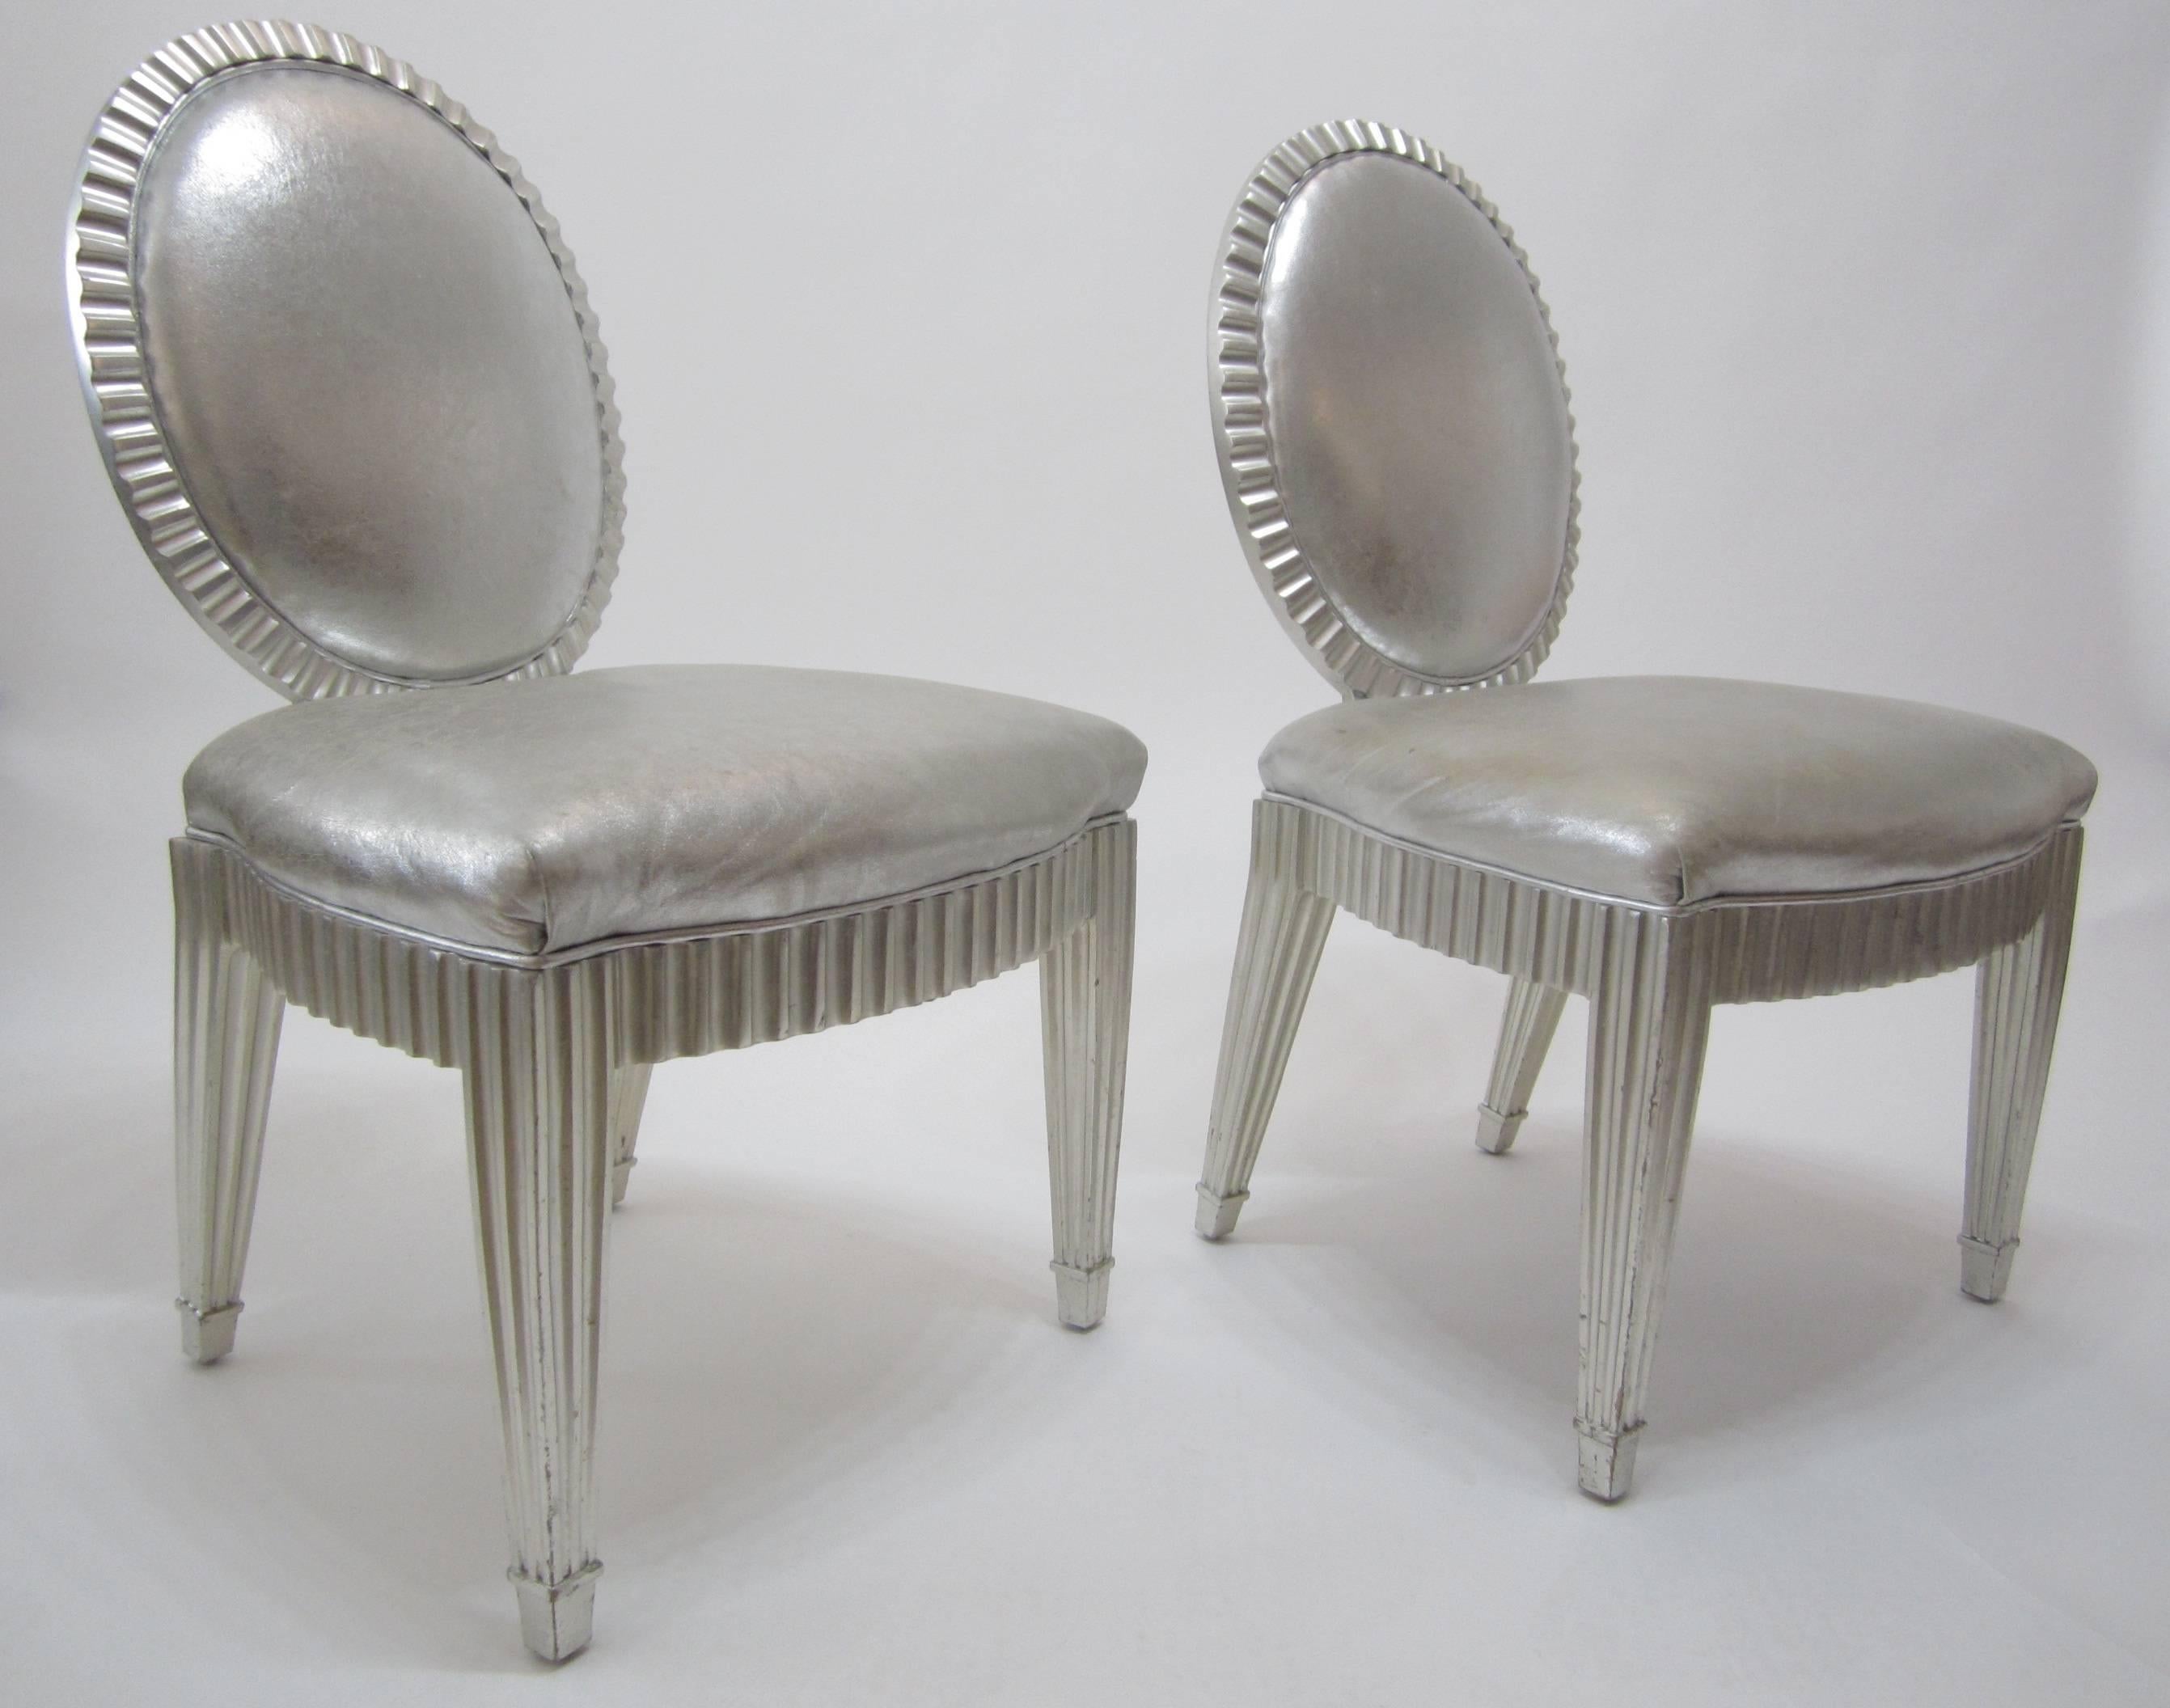 Italian Pair of Silver Leaf and Silver Metallic Leather Neoclassical Chairs by Donghia